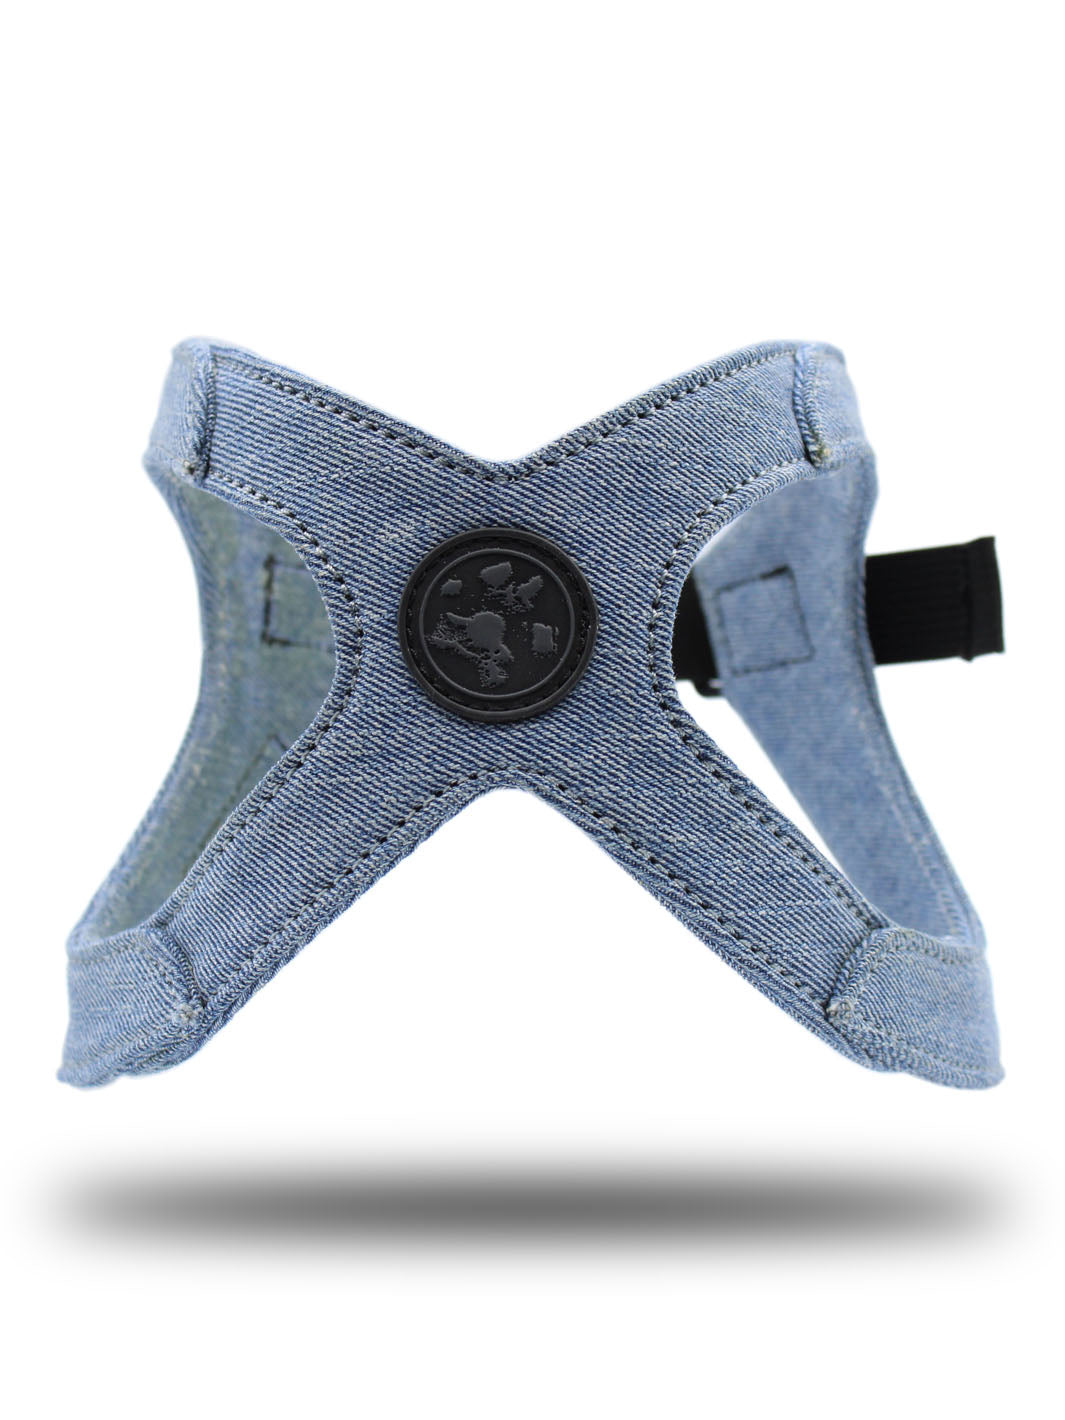 Front view of the custom made denim frenchie harness by MAGNUS Canis.